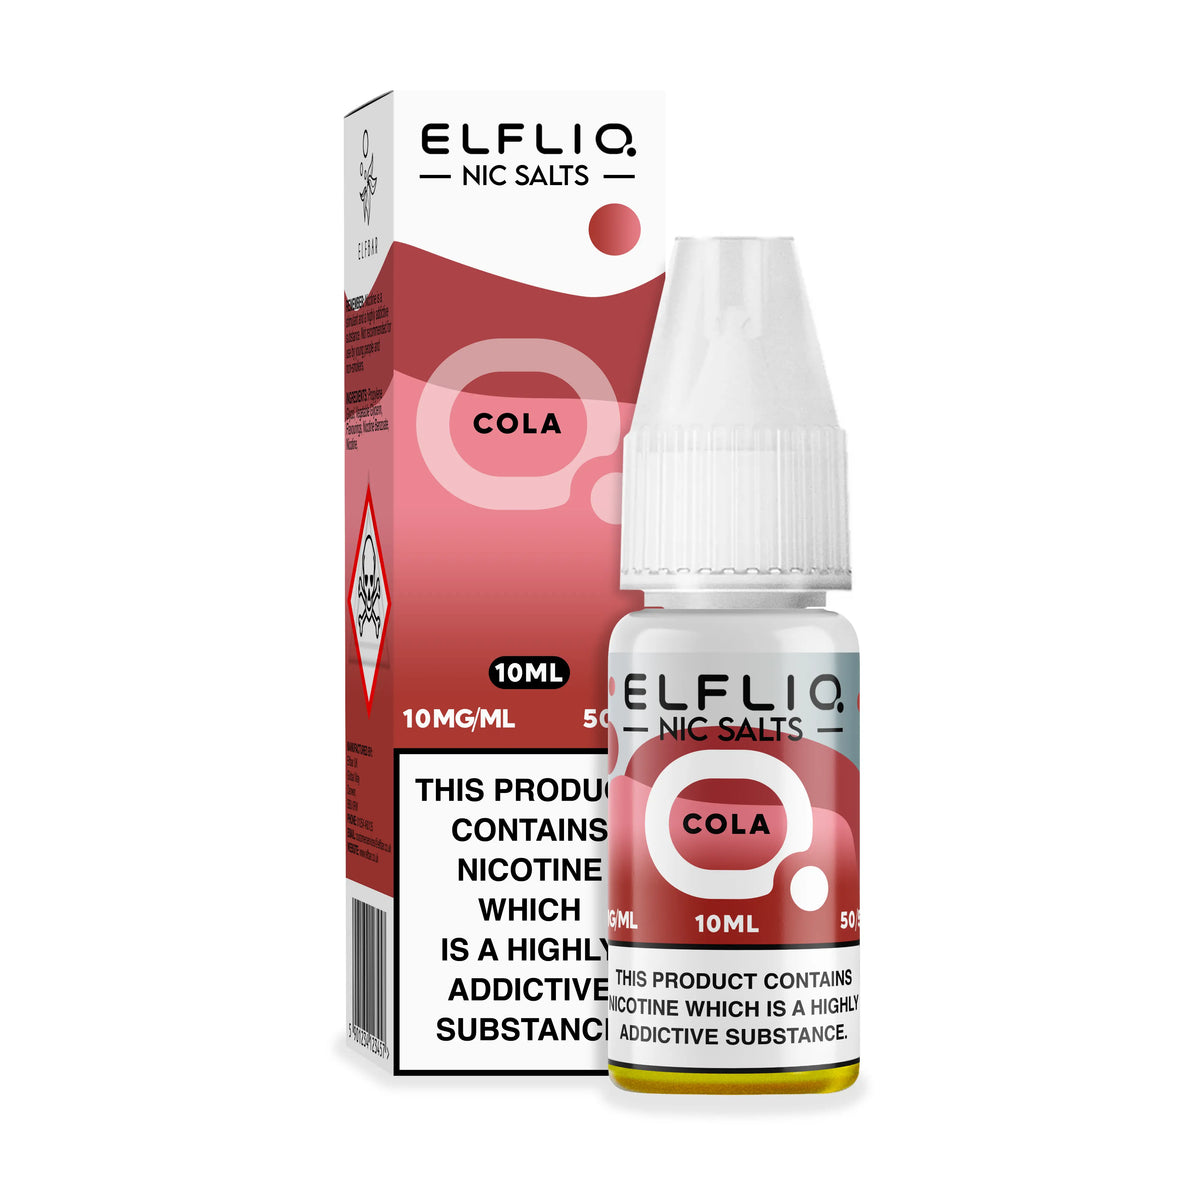 The next step has arrived. The World's most popular e-liquids previously locked away in disposable devices, now you can enjoy these in any device you like!